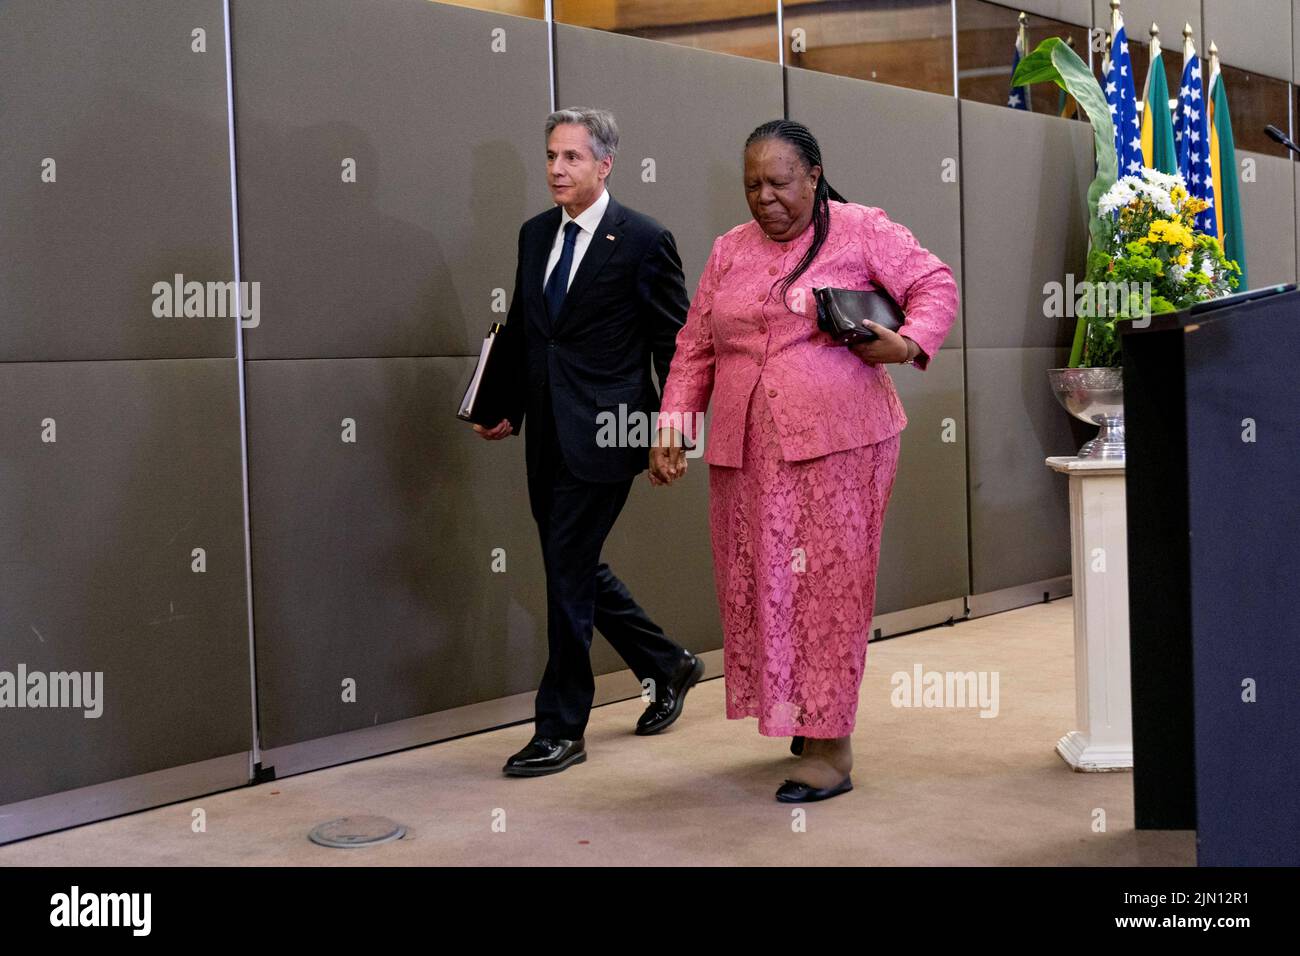 U.S. Secretary of State Antony Blinken and South Africa's Foreign Minister Naledi Pandor depart following a news conference after a meeting at the South African Department of International Relations and Cooperation, in Pretoria, South Africa, August 8, 2022. Andrew Harnik/Pool via REUTERS Stock Photo